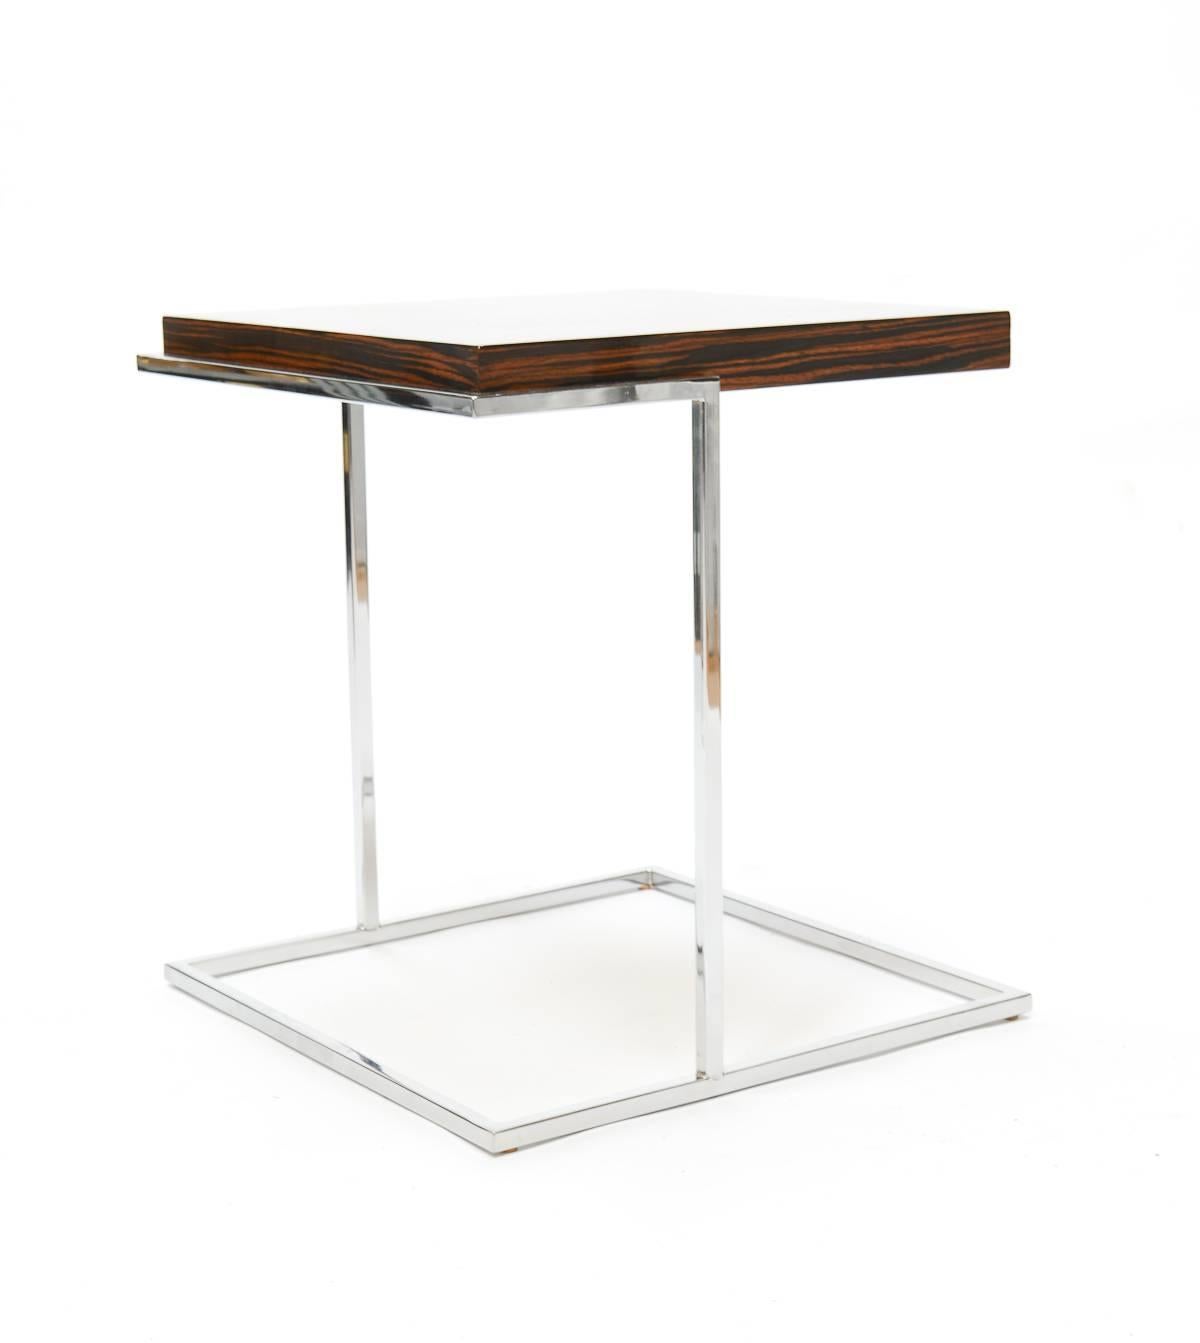 American Pair of Stunning Zebra Wood and Chrome Cantilever Side Tables For Sale